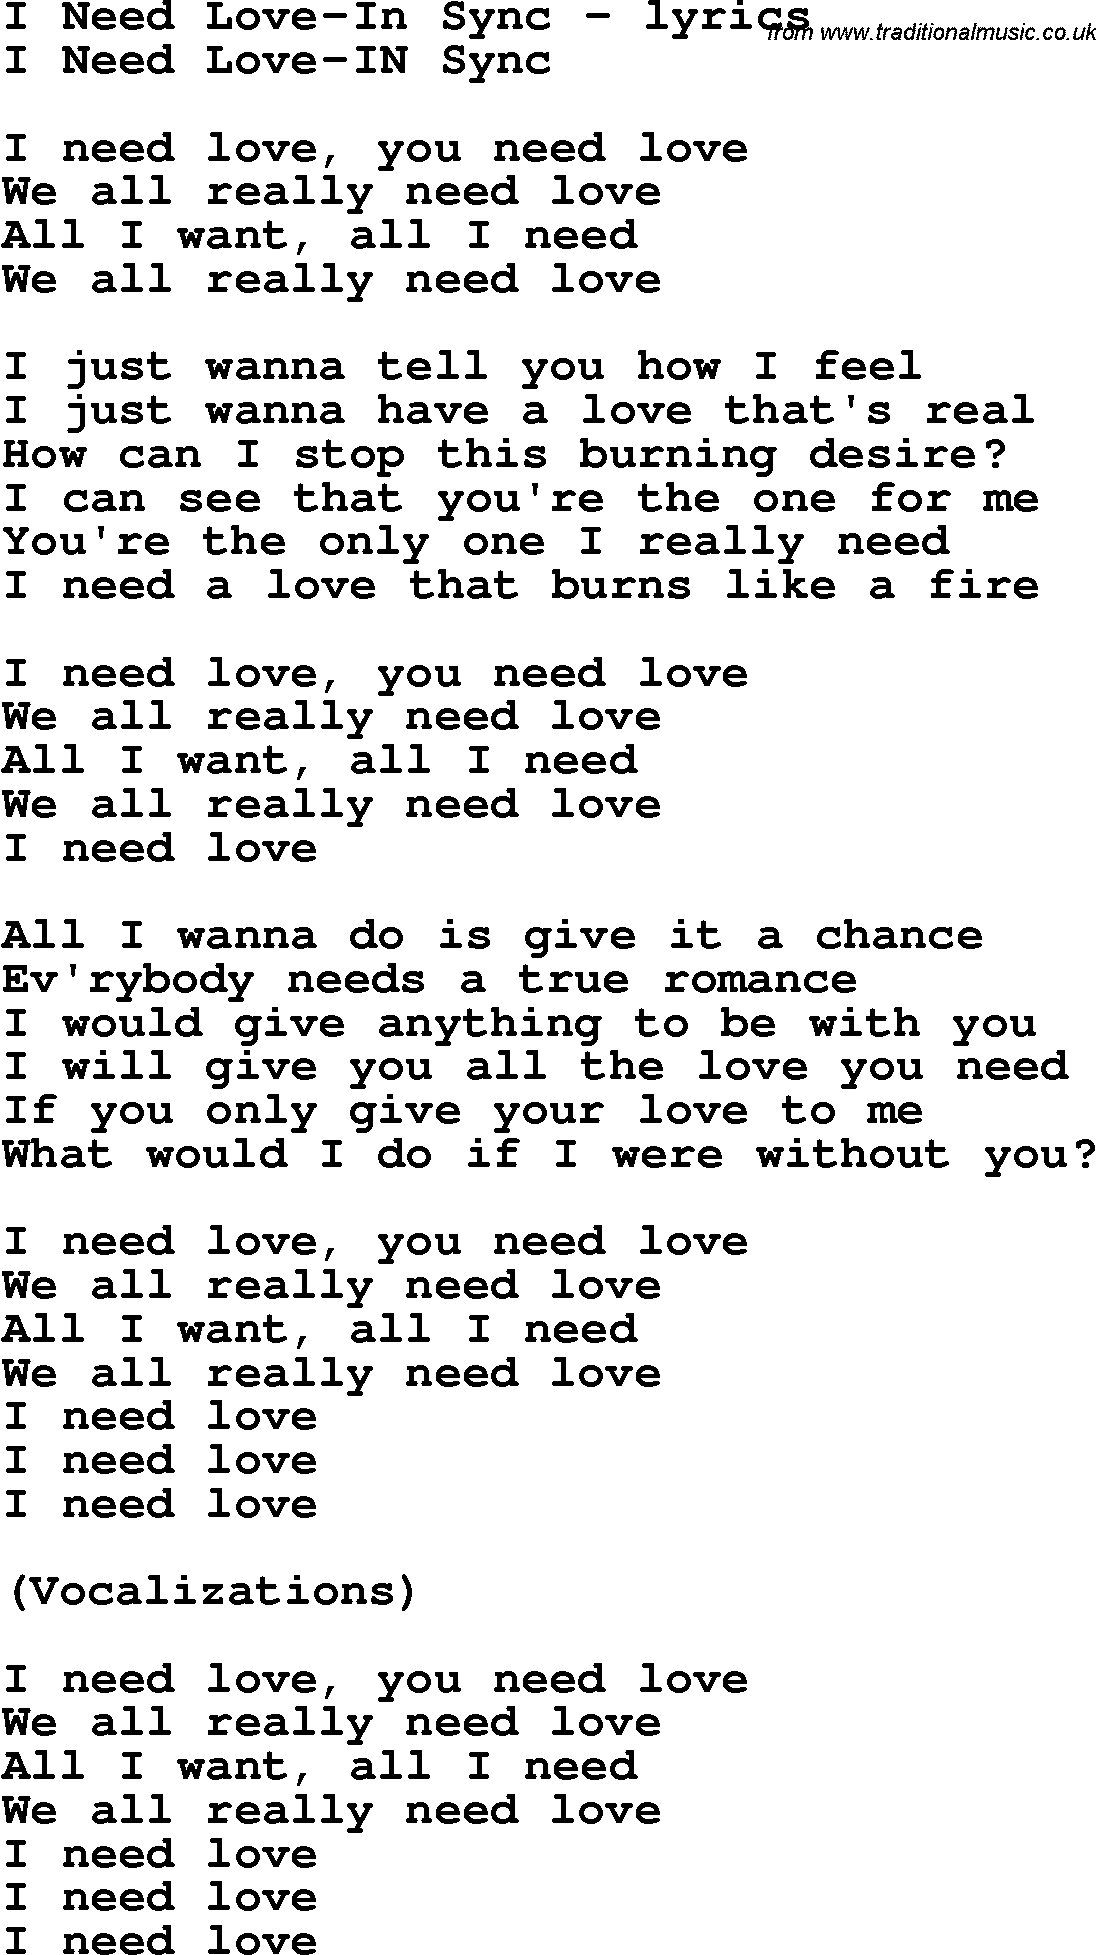 Love Song Lyrics for: I Need Love-In Sync